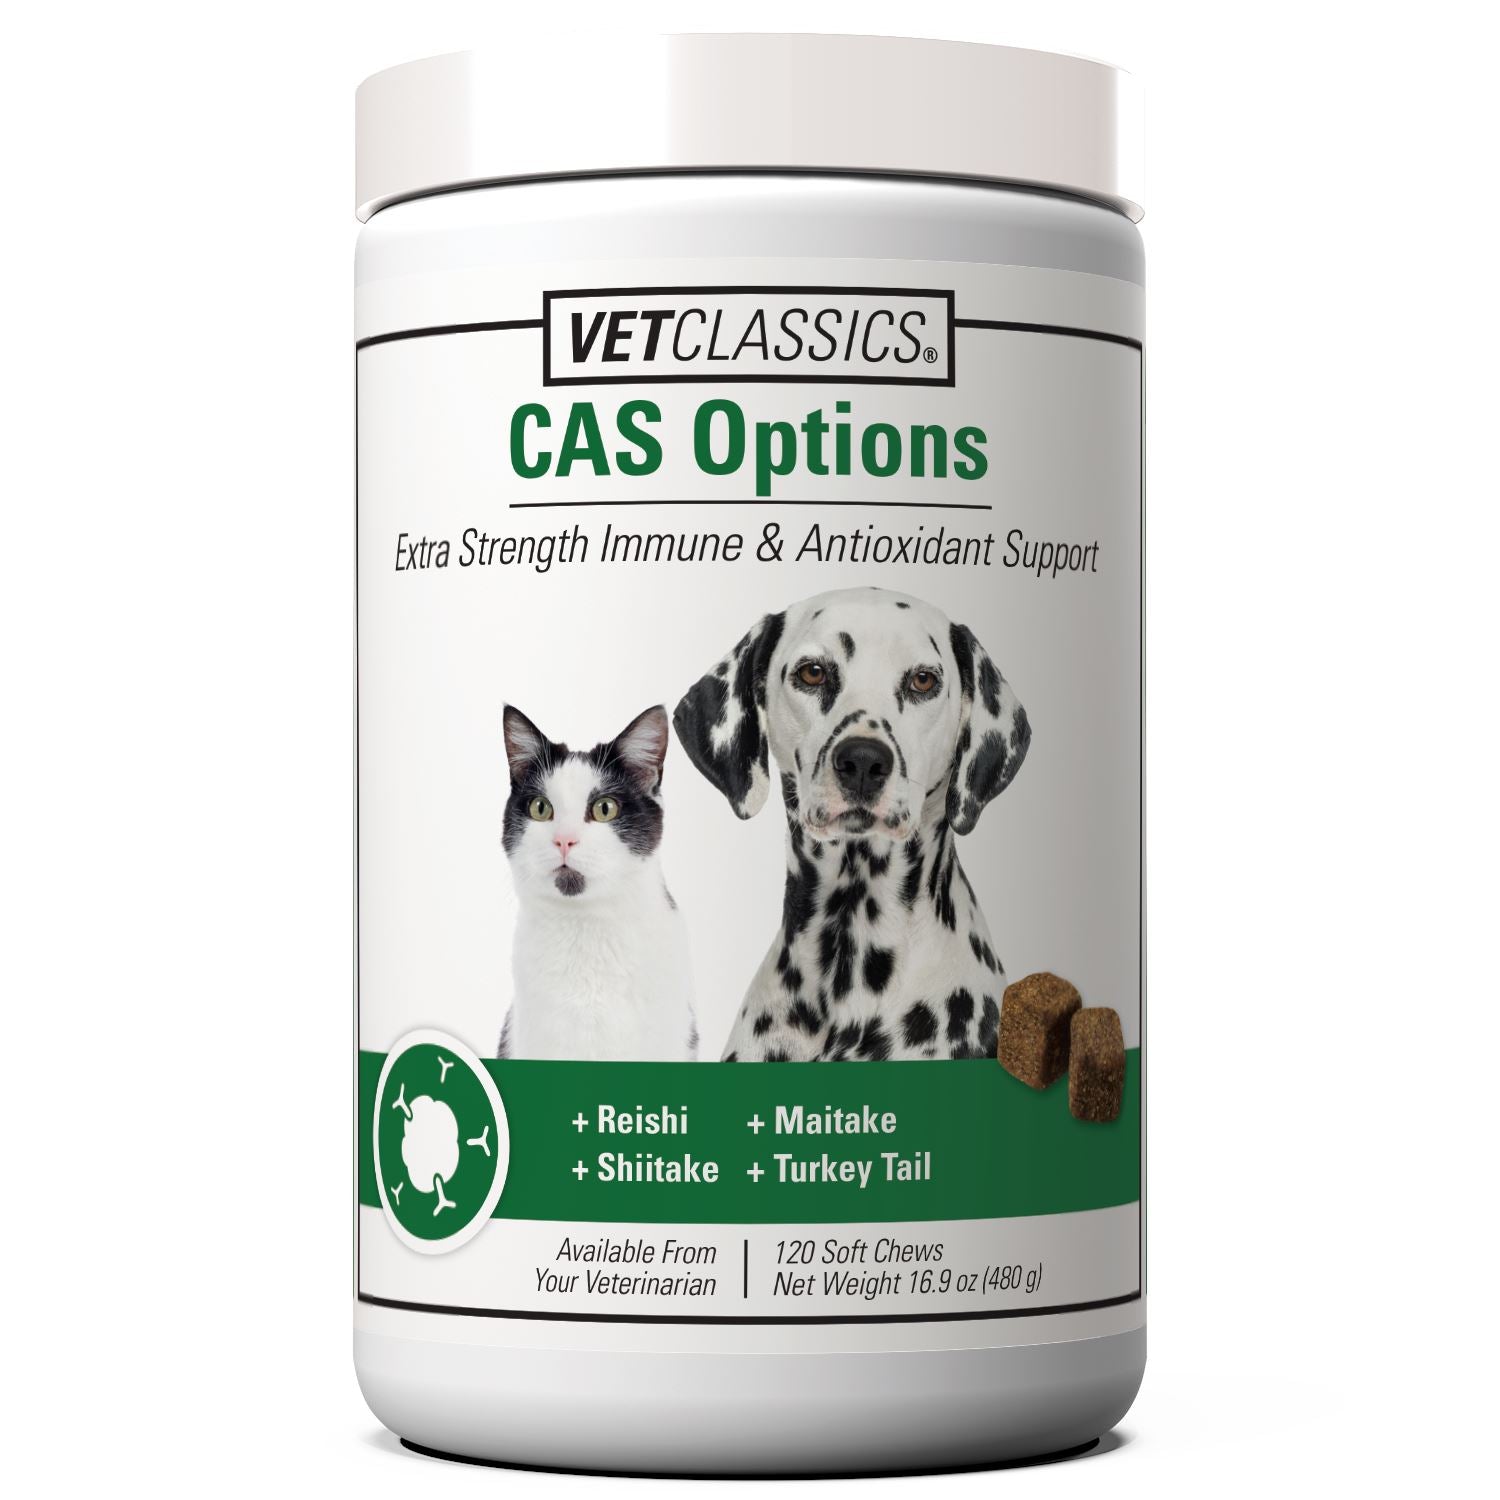 Vet Classics CAS Options Soft Chews for Dogs and Cats (120 Soft Chews)